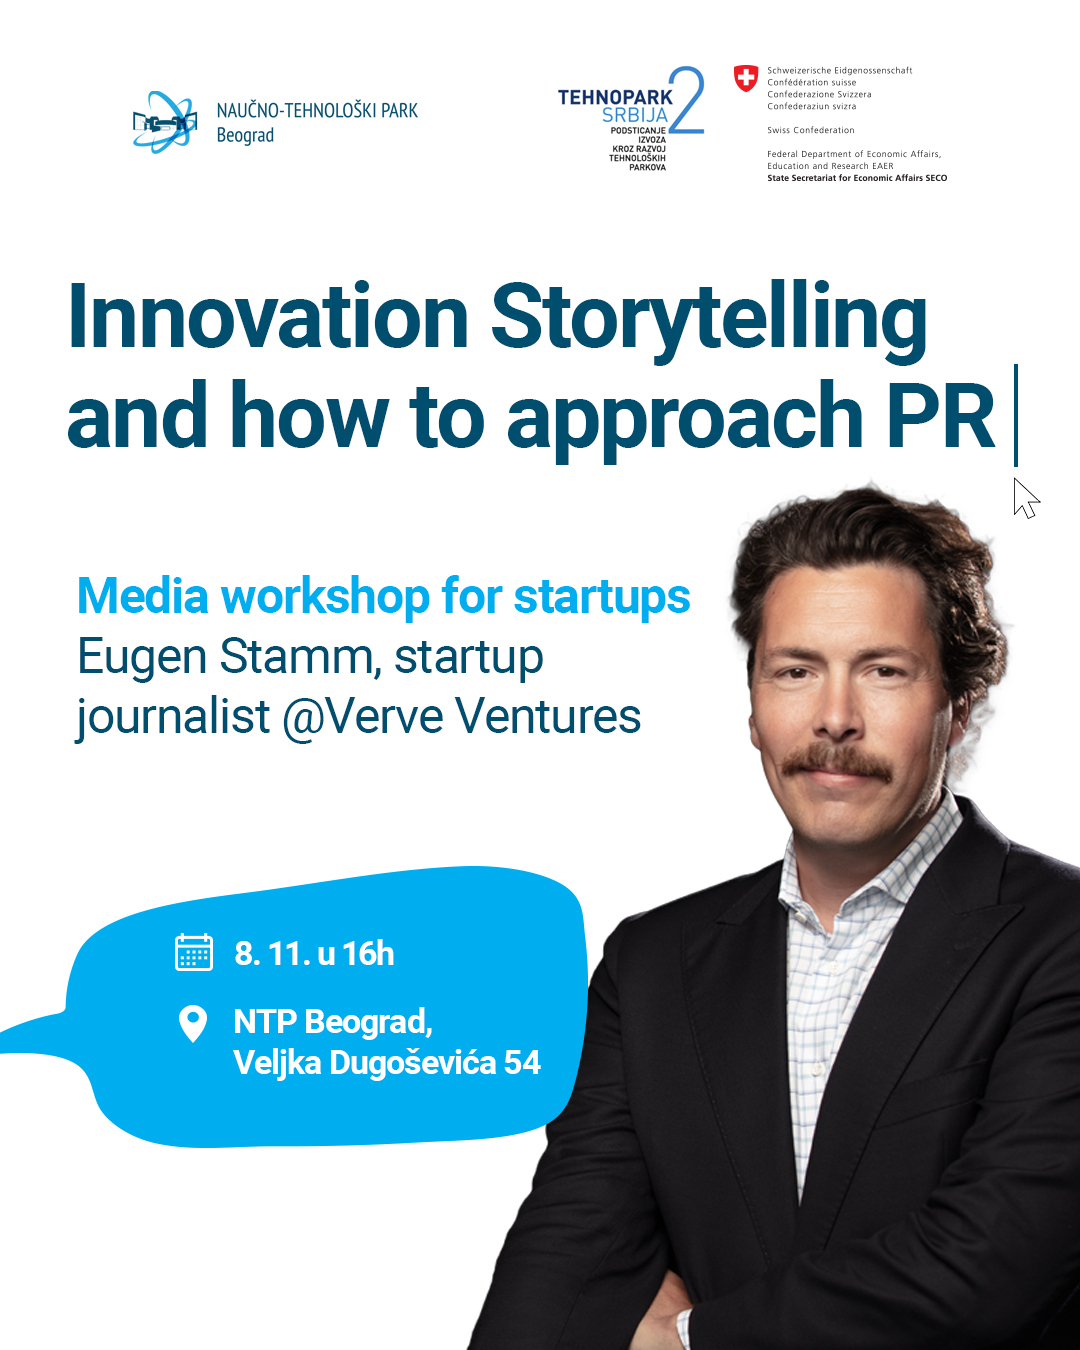 Innovation Storytelling and how to approach PR